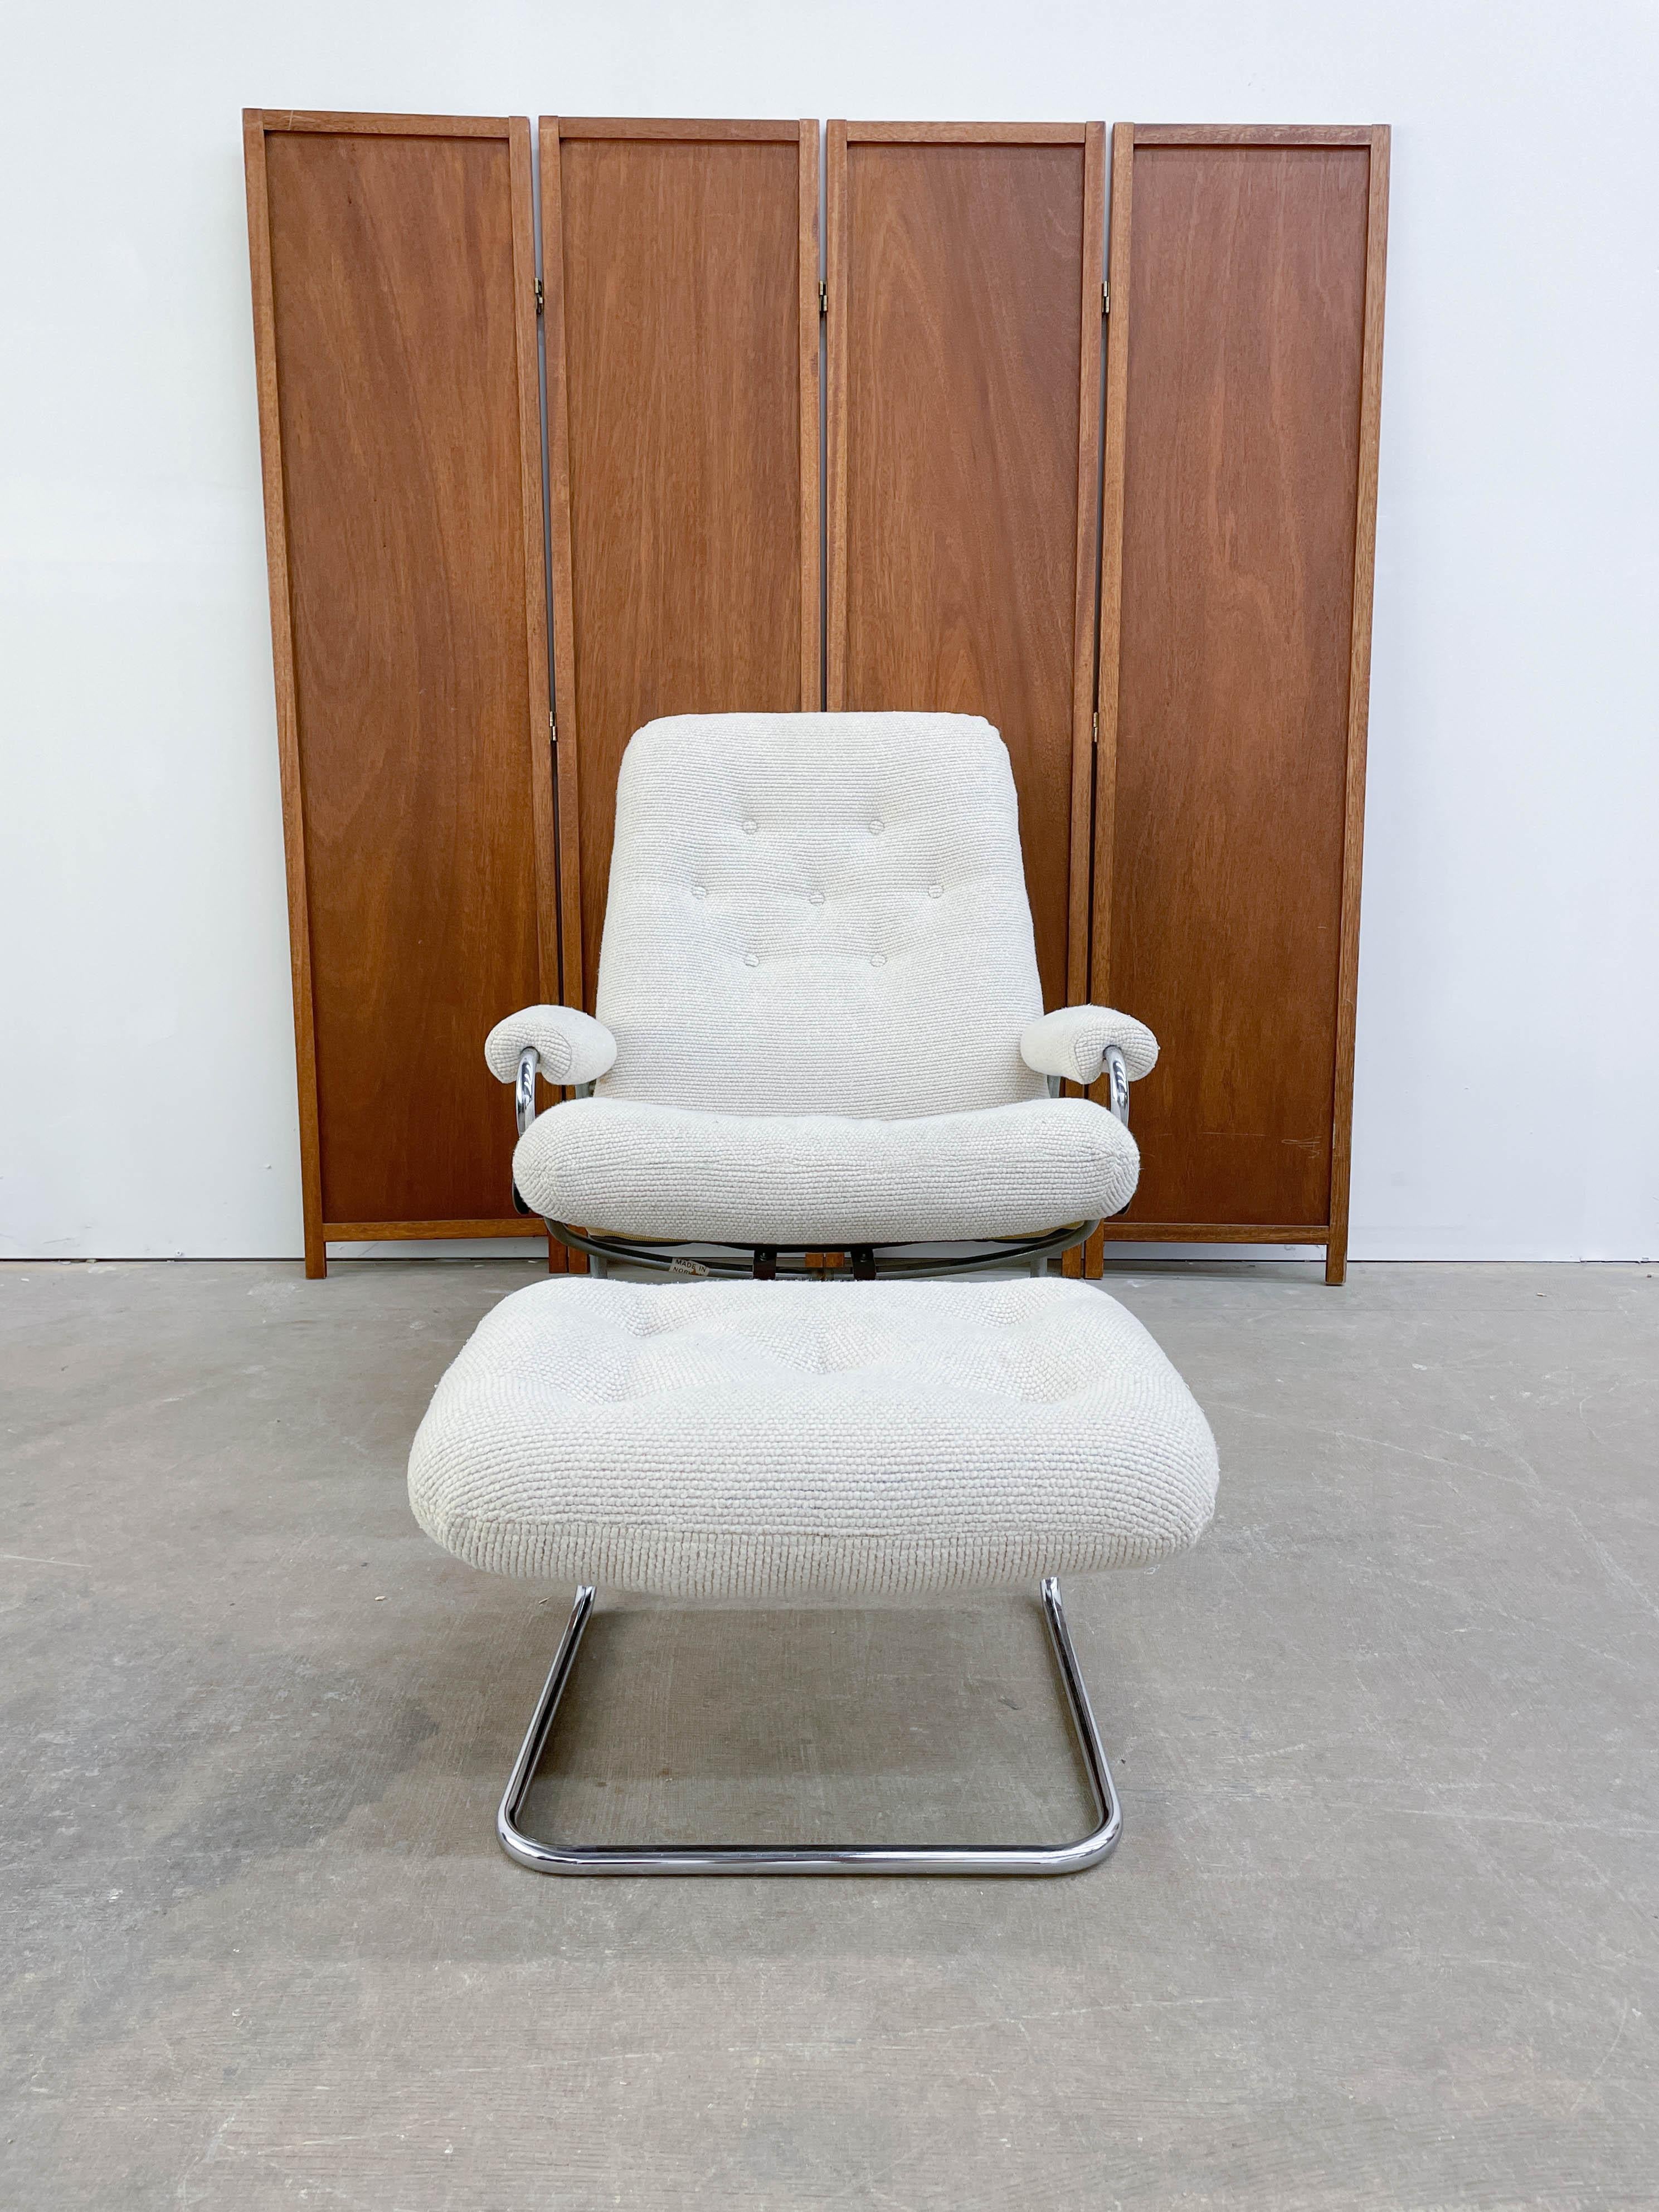 This swinging 70s recliner by Ekornes in a white Boucle type material offers an adjustable reclining angle and a cool cantilevered chrome frame. This is a classic example of 1970s style and Scandinavian design, and it is all wrapped up with a